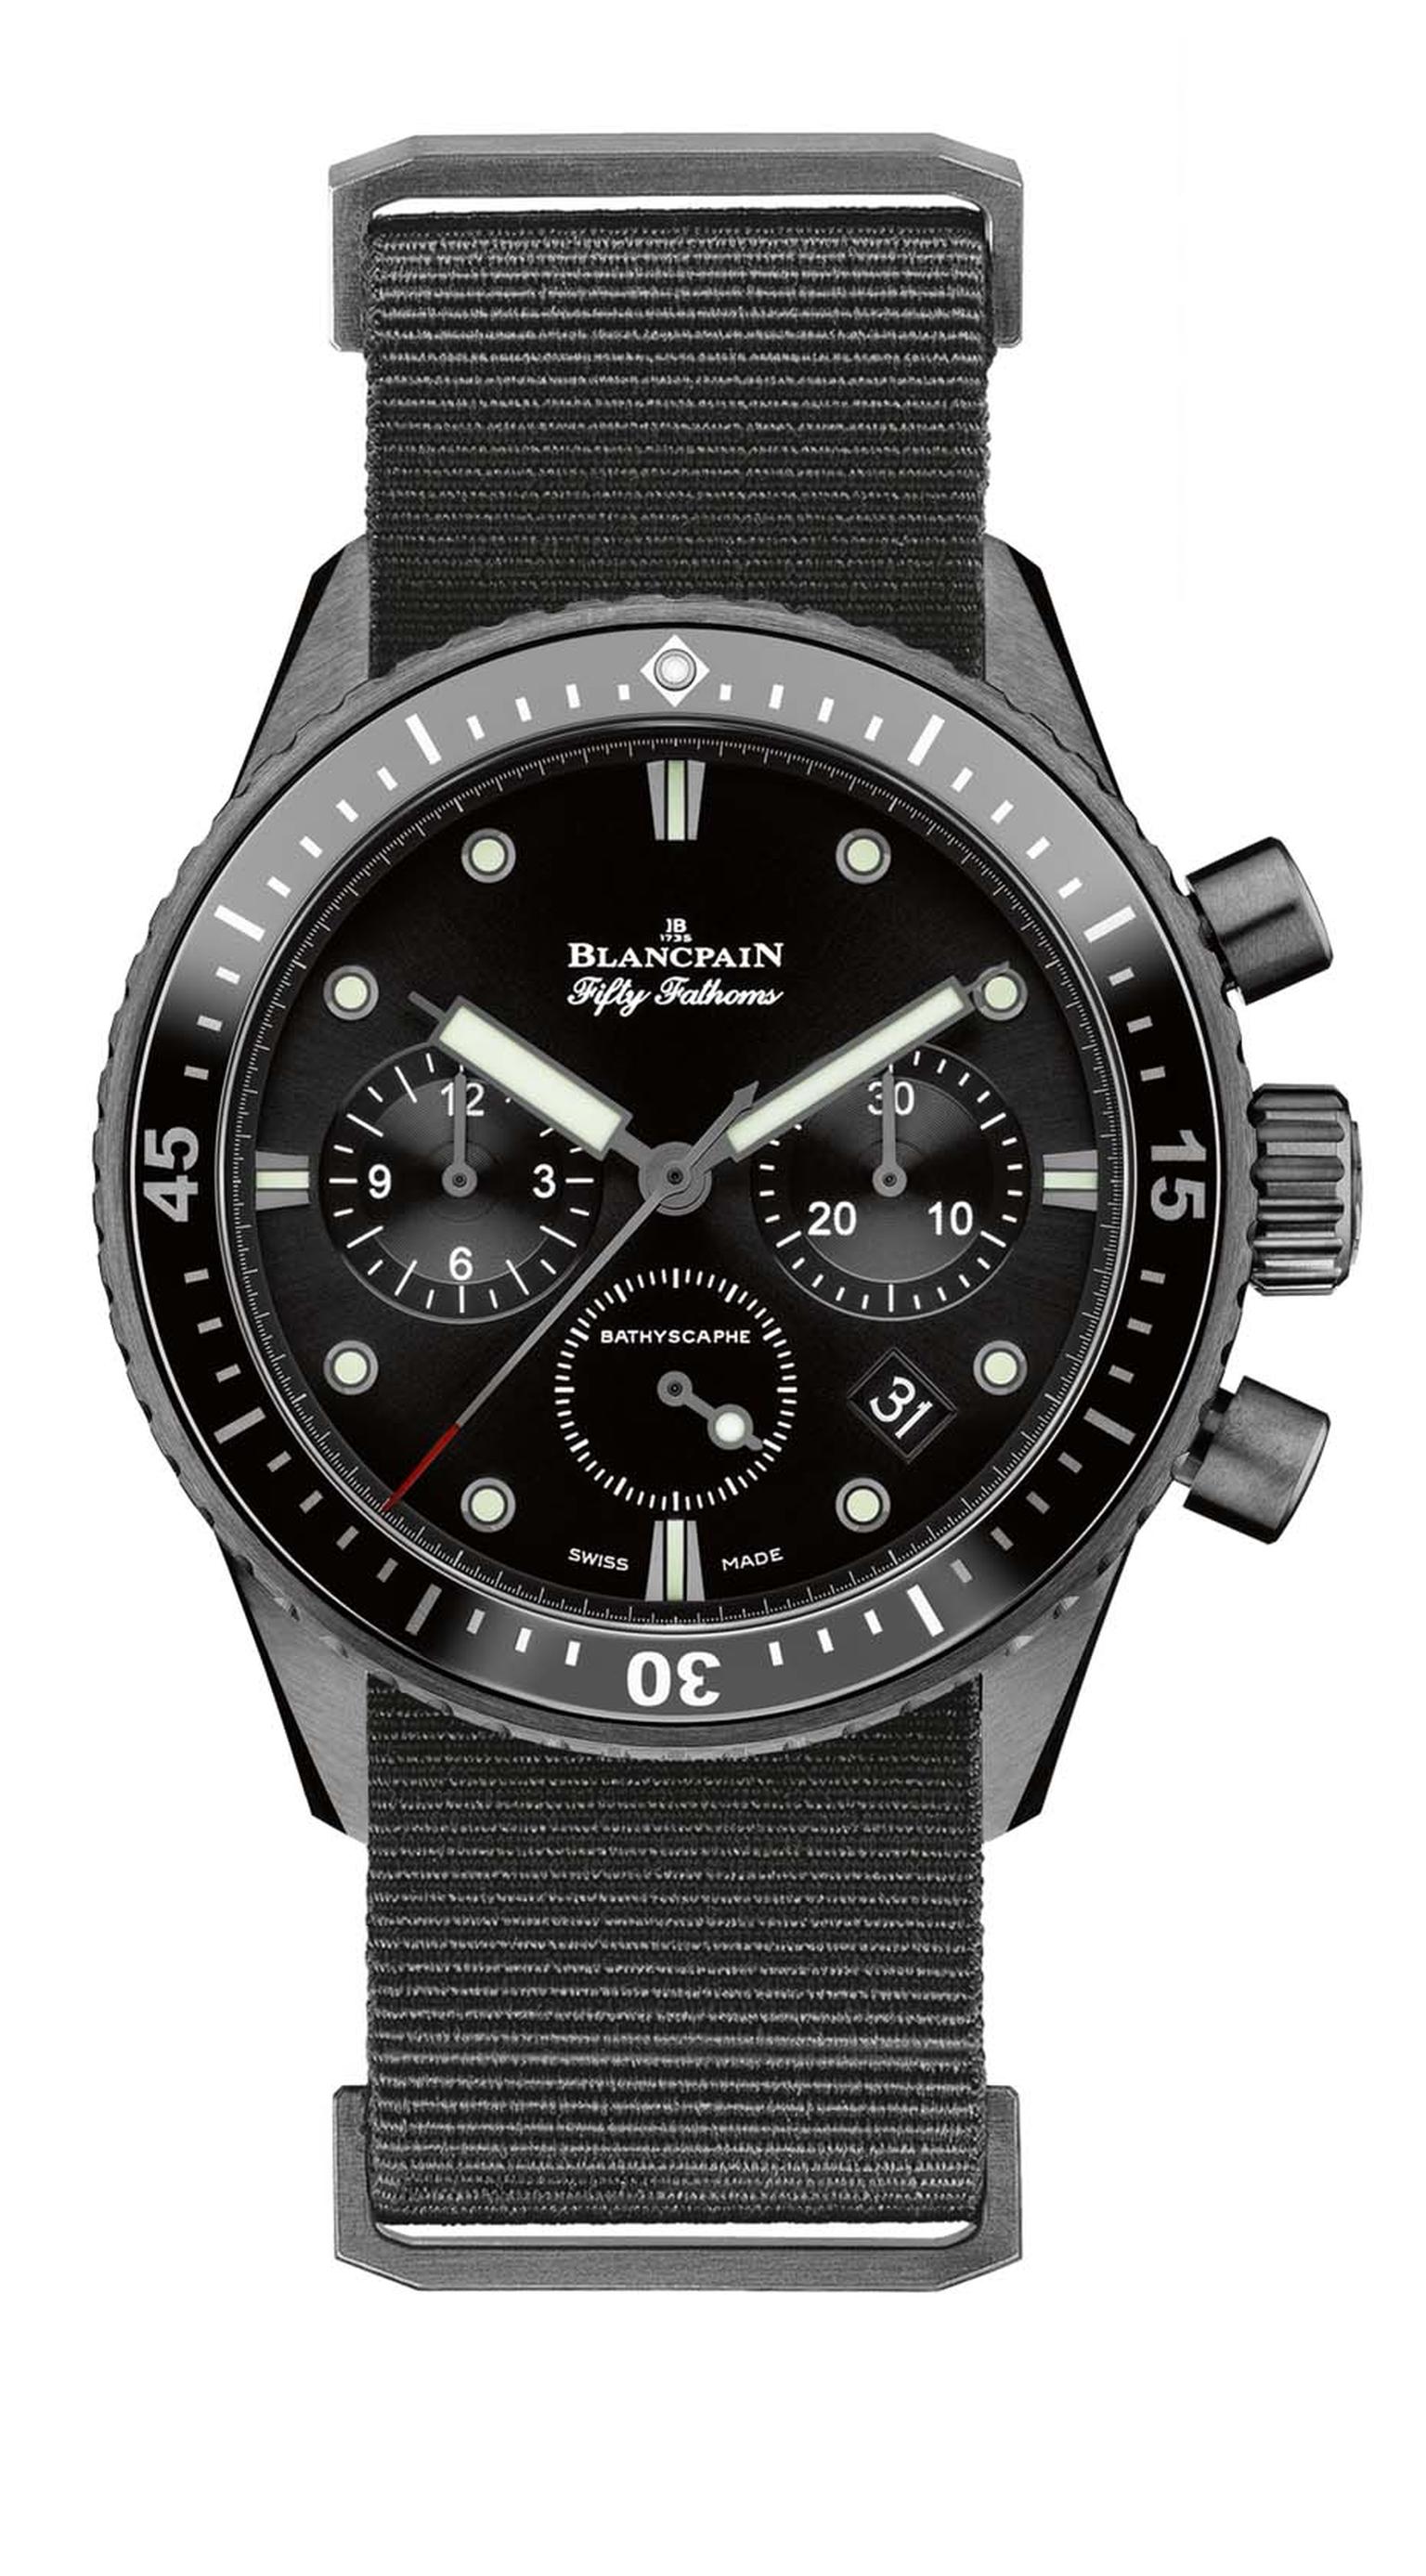 Originally designed for the French Navy, the Blancpain Fifty Fathoms Bathyscaphe Flyback Chronograph watch comes with a heavy-duty nylon NATO strap